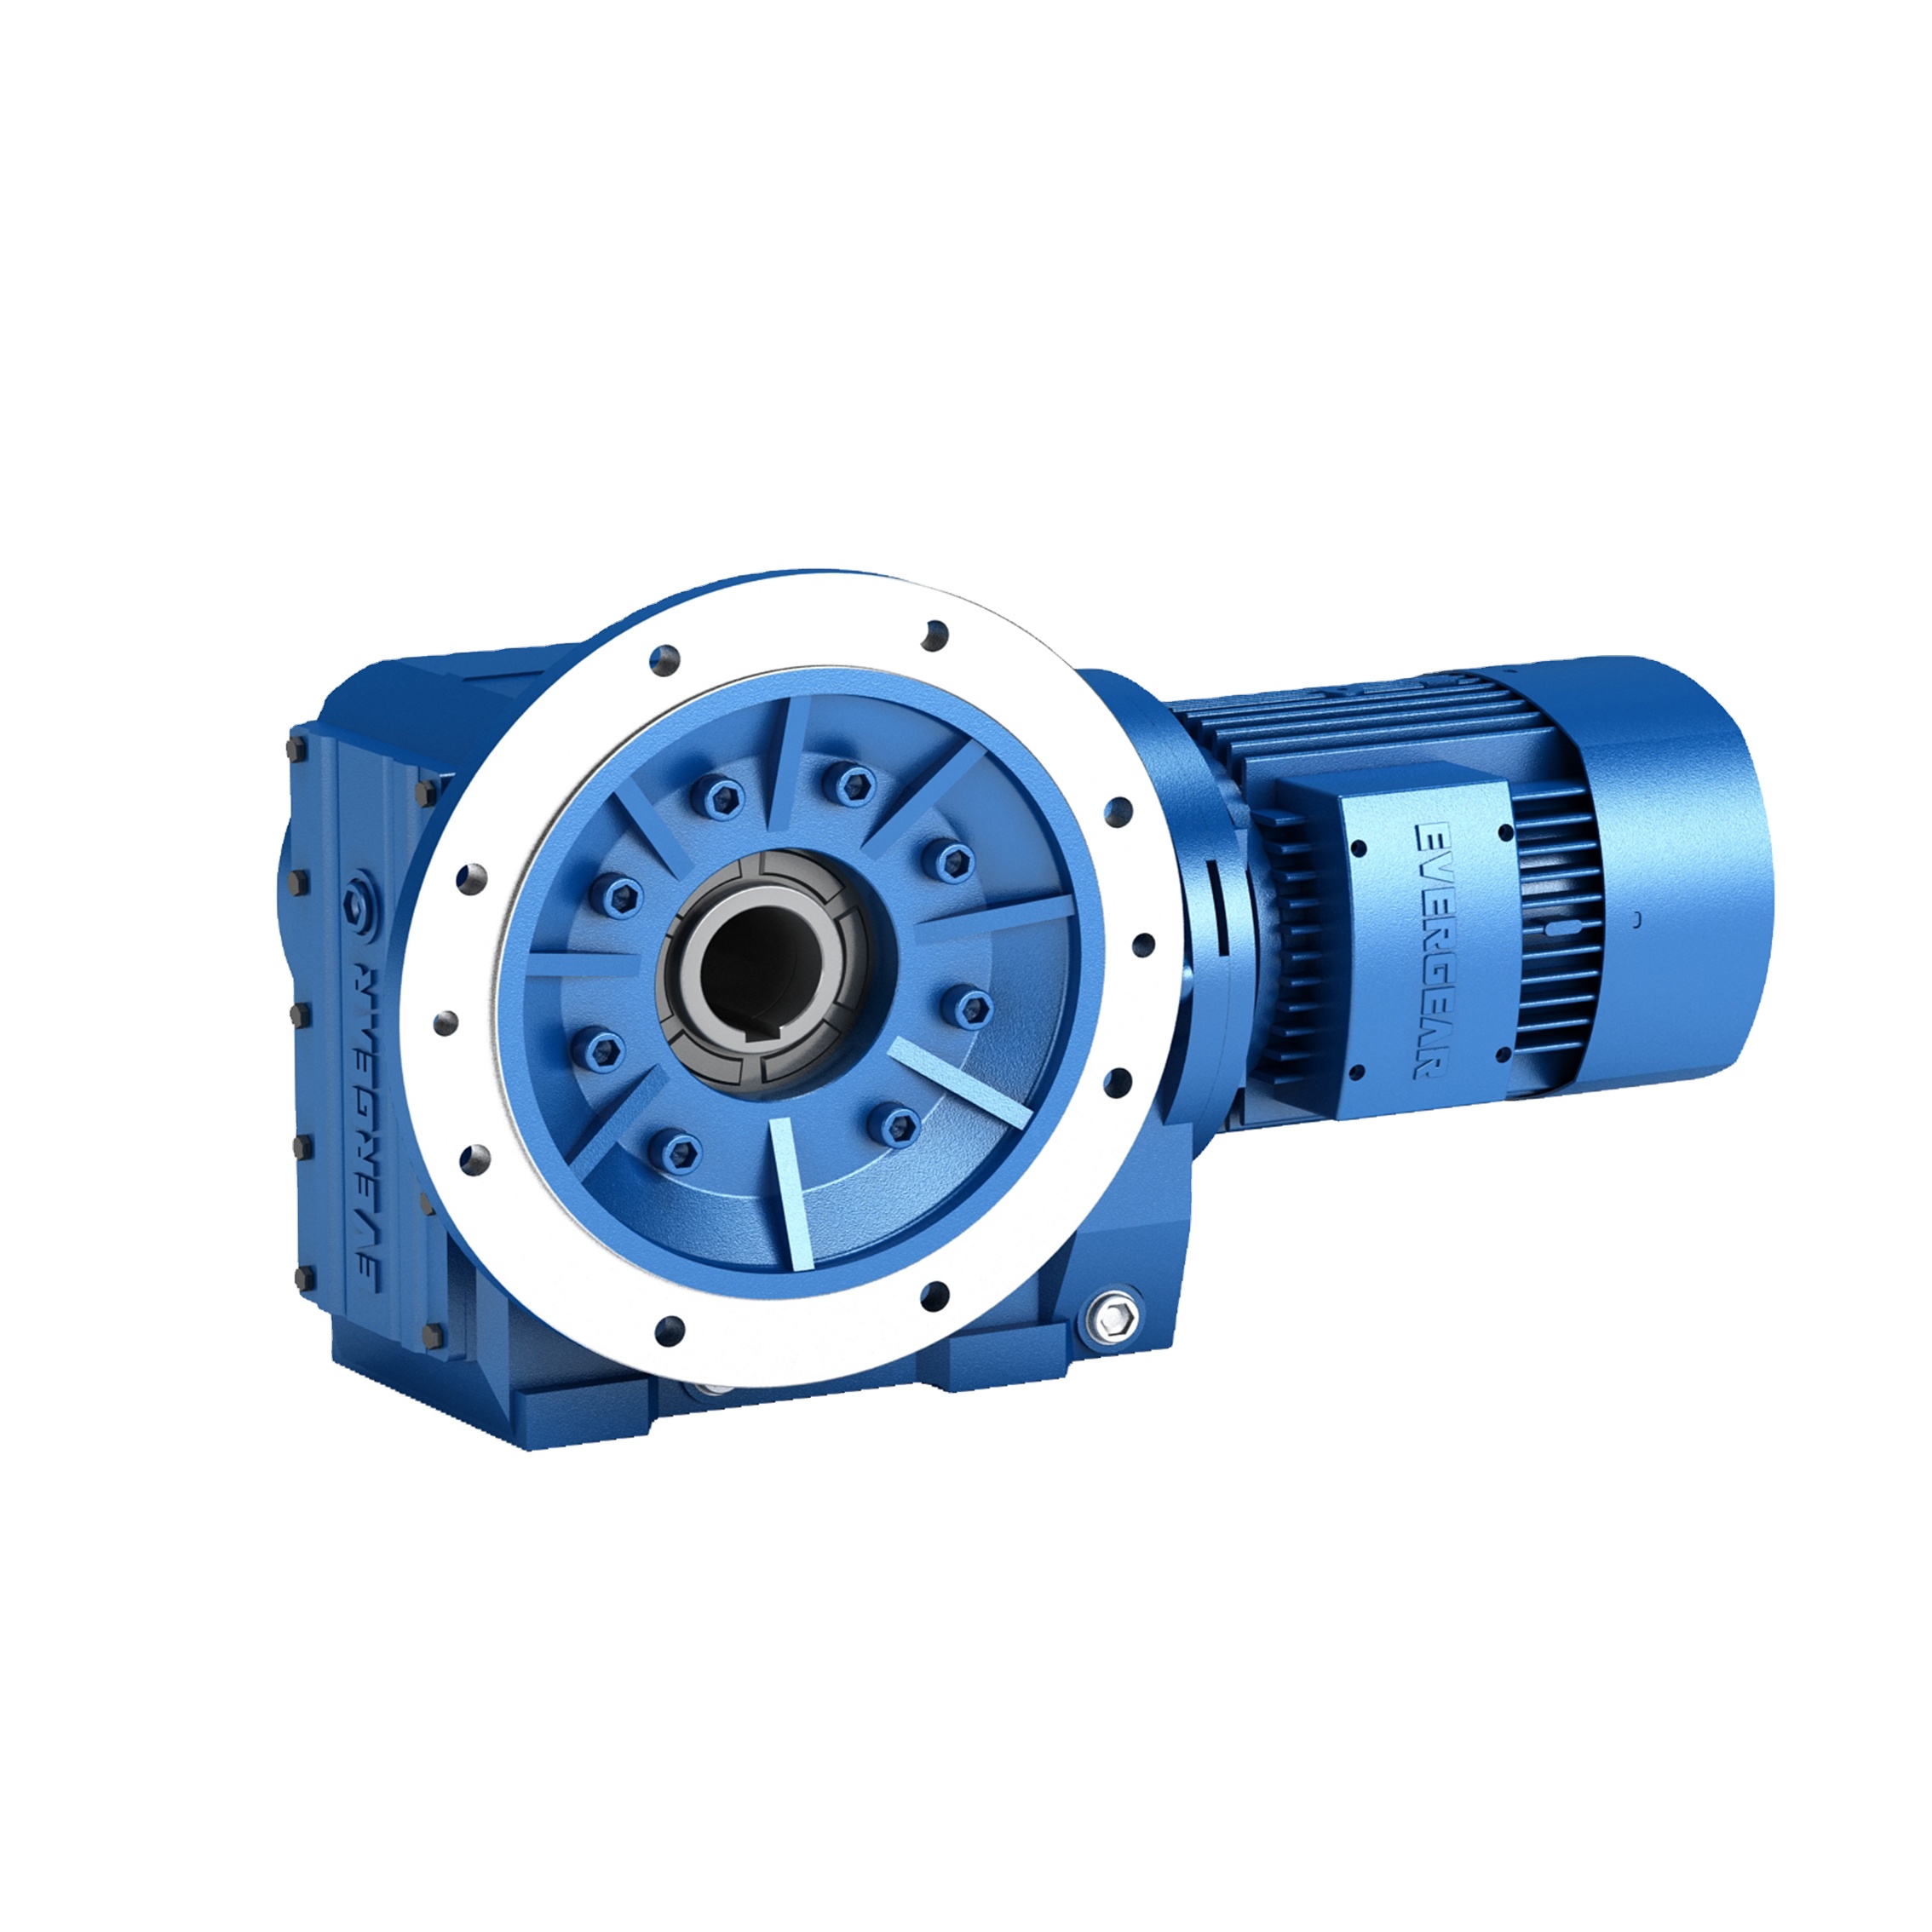 EVERGEAR DRIVE gear reducer kaf97 for wood shavings right angle hollow shaft flange gear motor